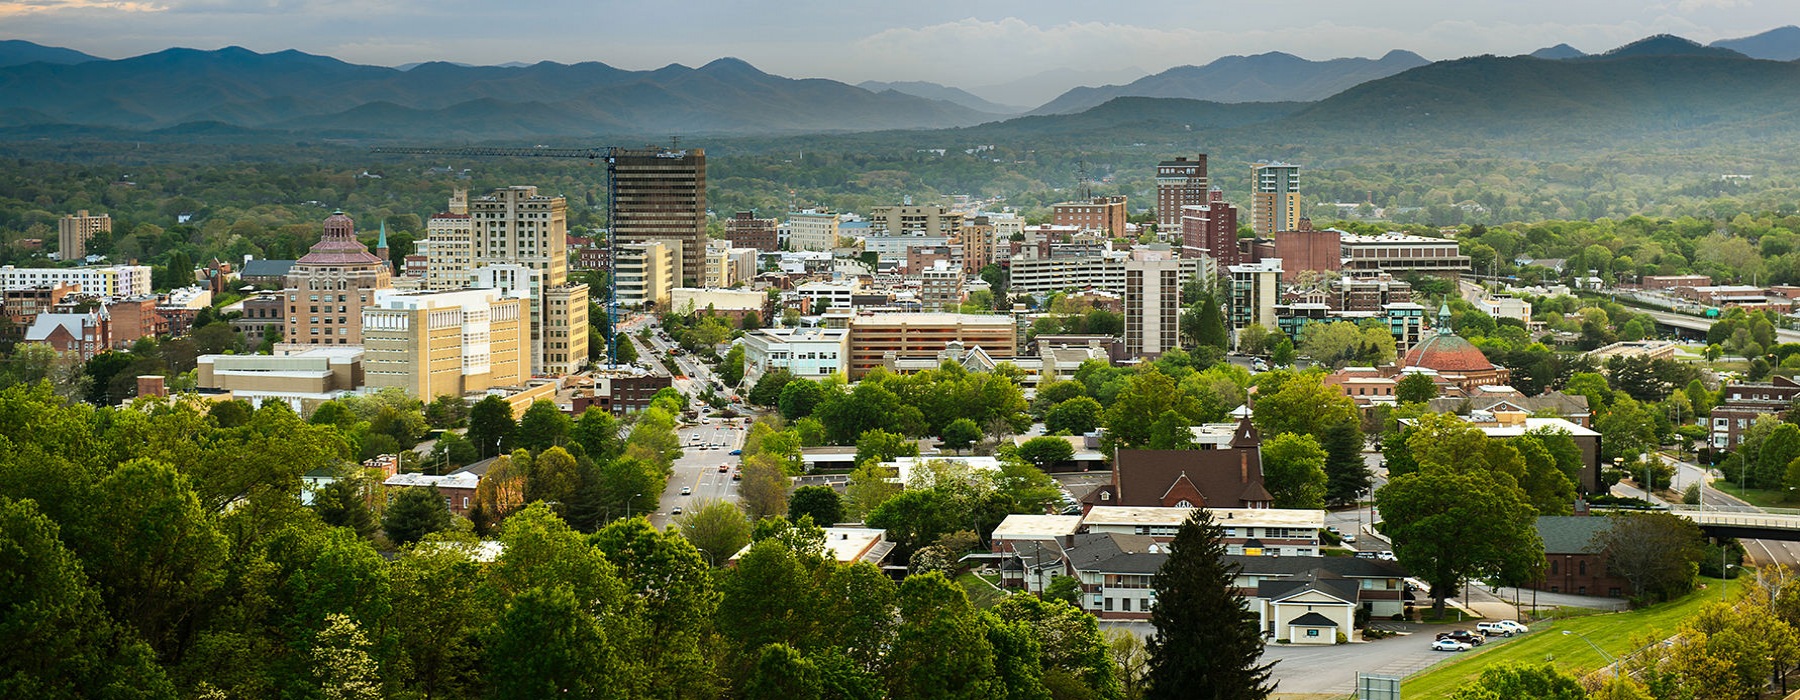 Beautiful nearby Asheville with mountains in the background